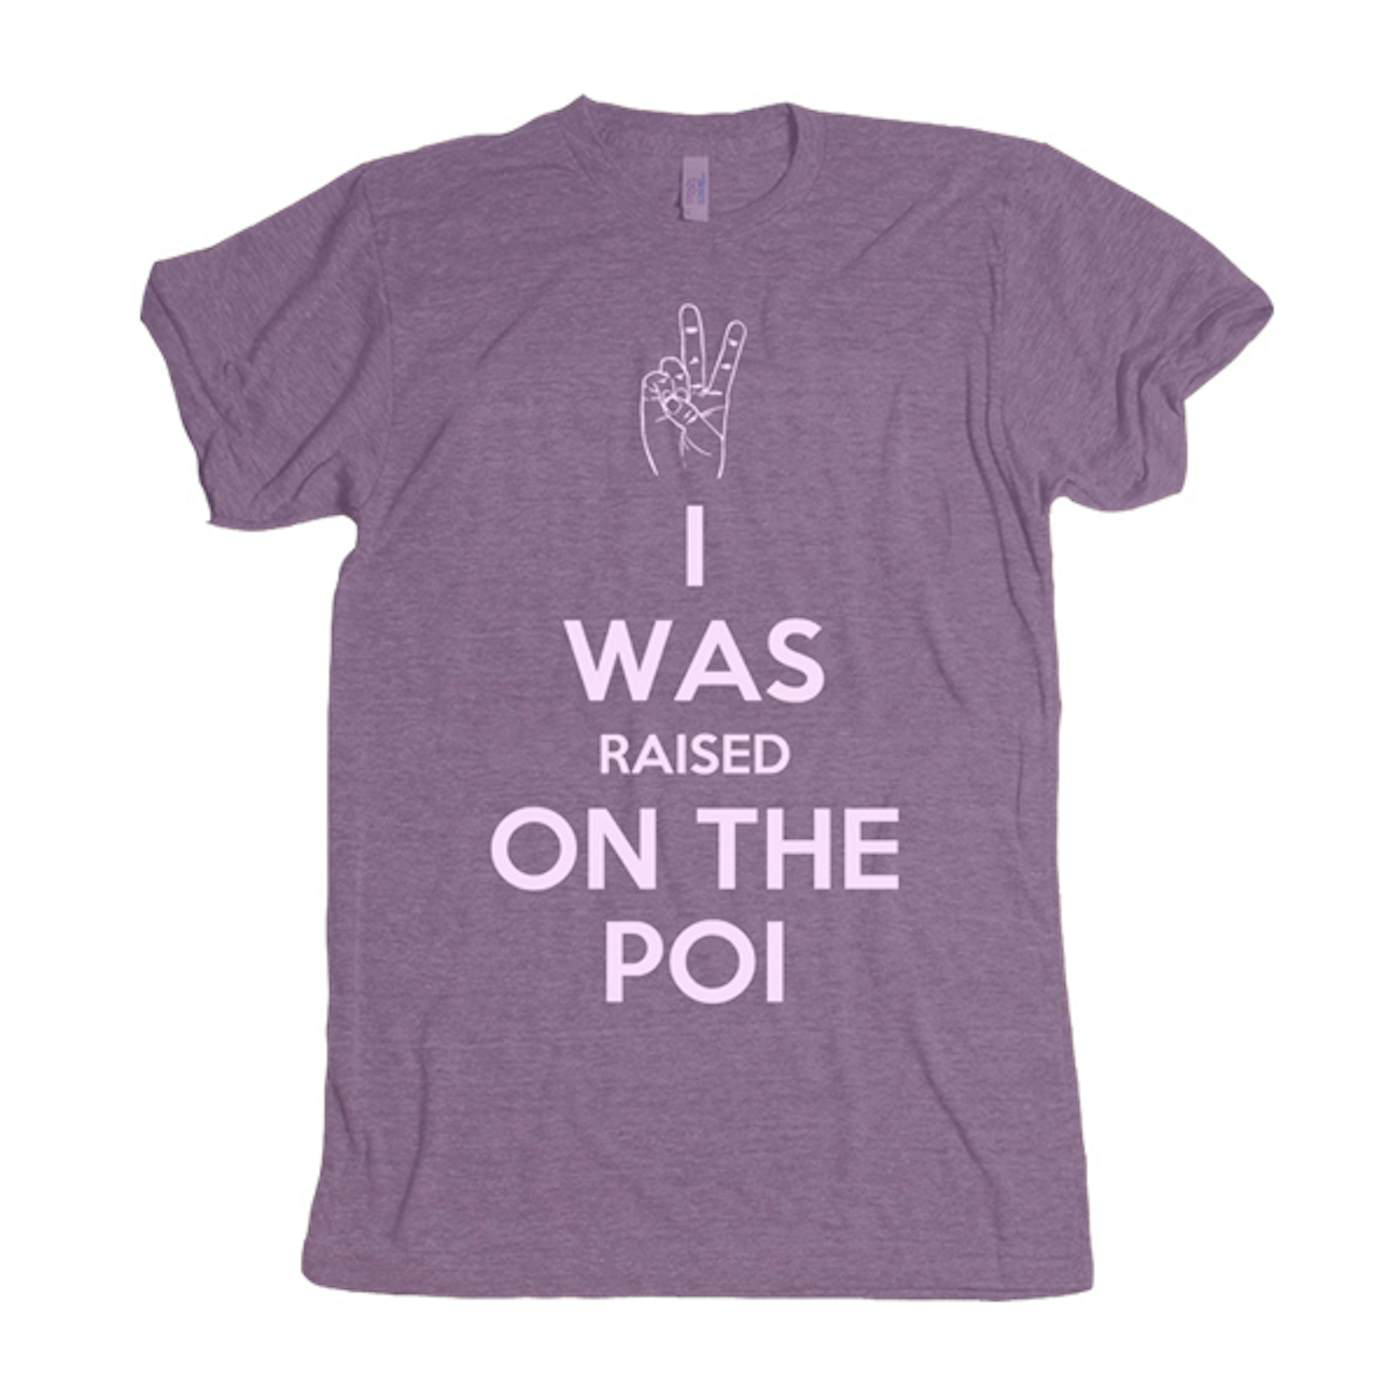 The Green – Raised On The Poi Tee